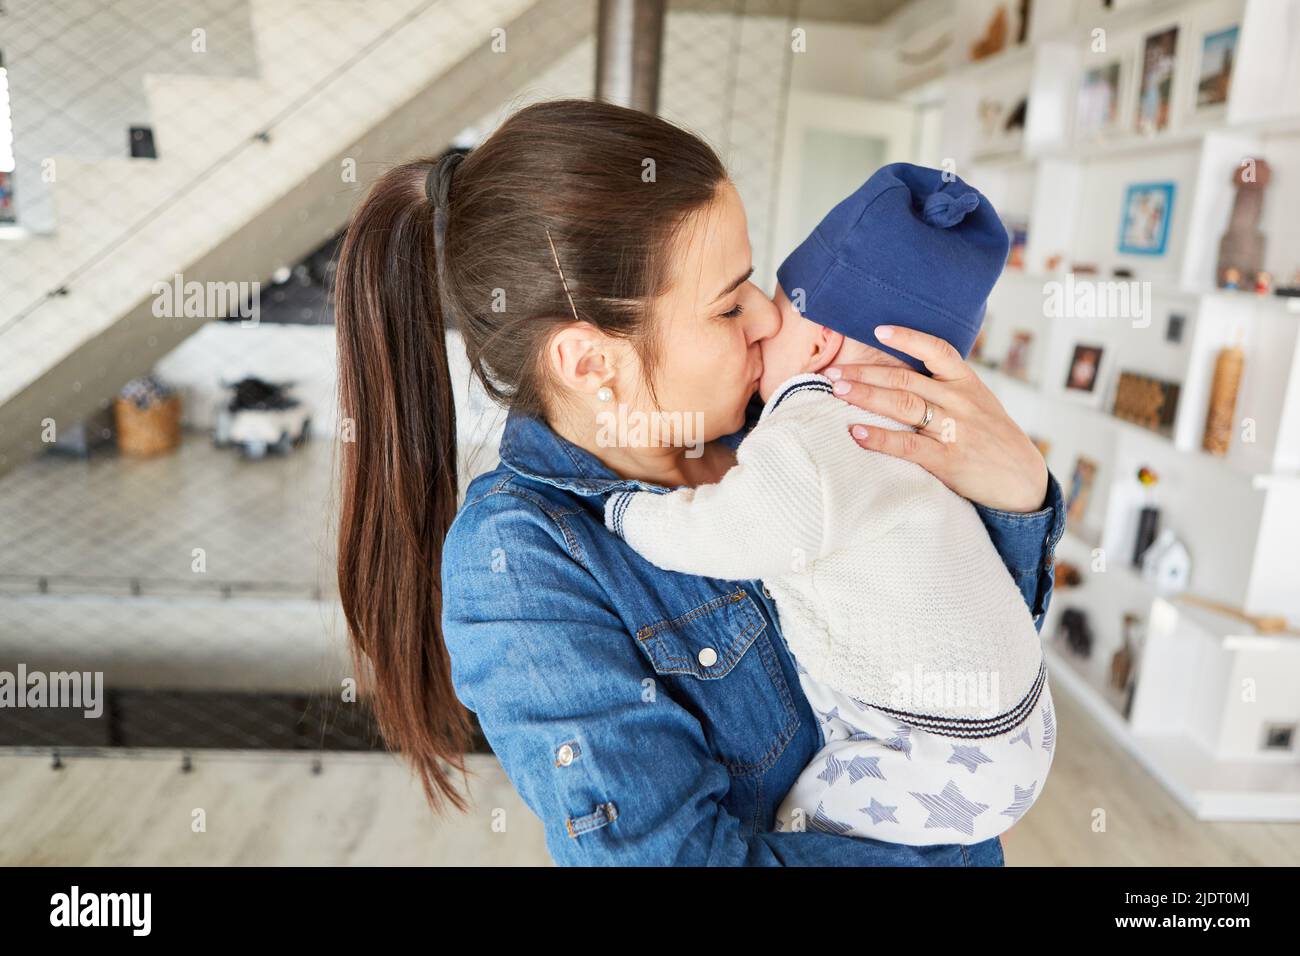 Happy mother with baby in her arms gives her infant a loving kiss Stock Photo